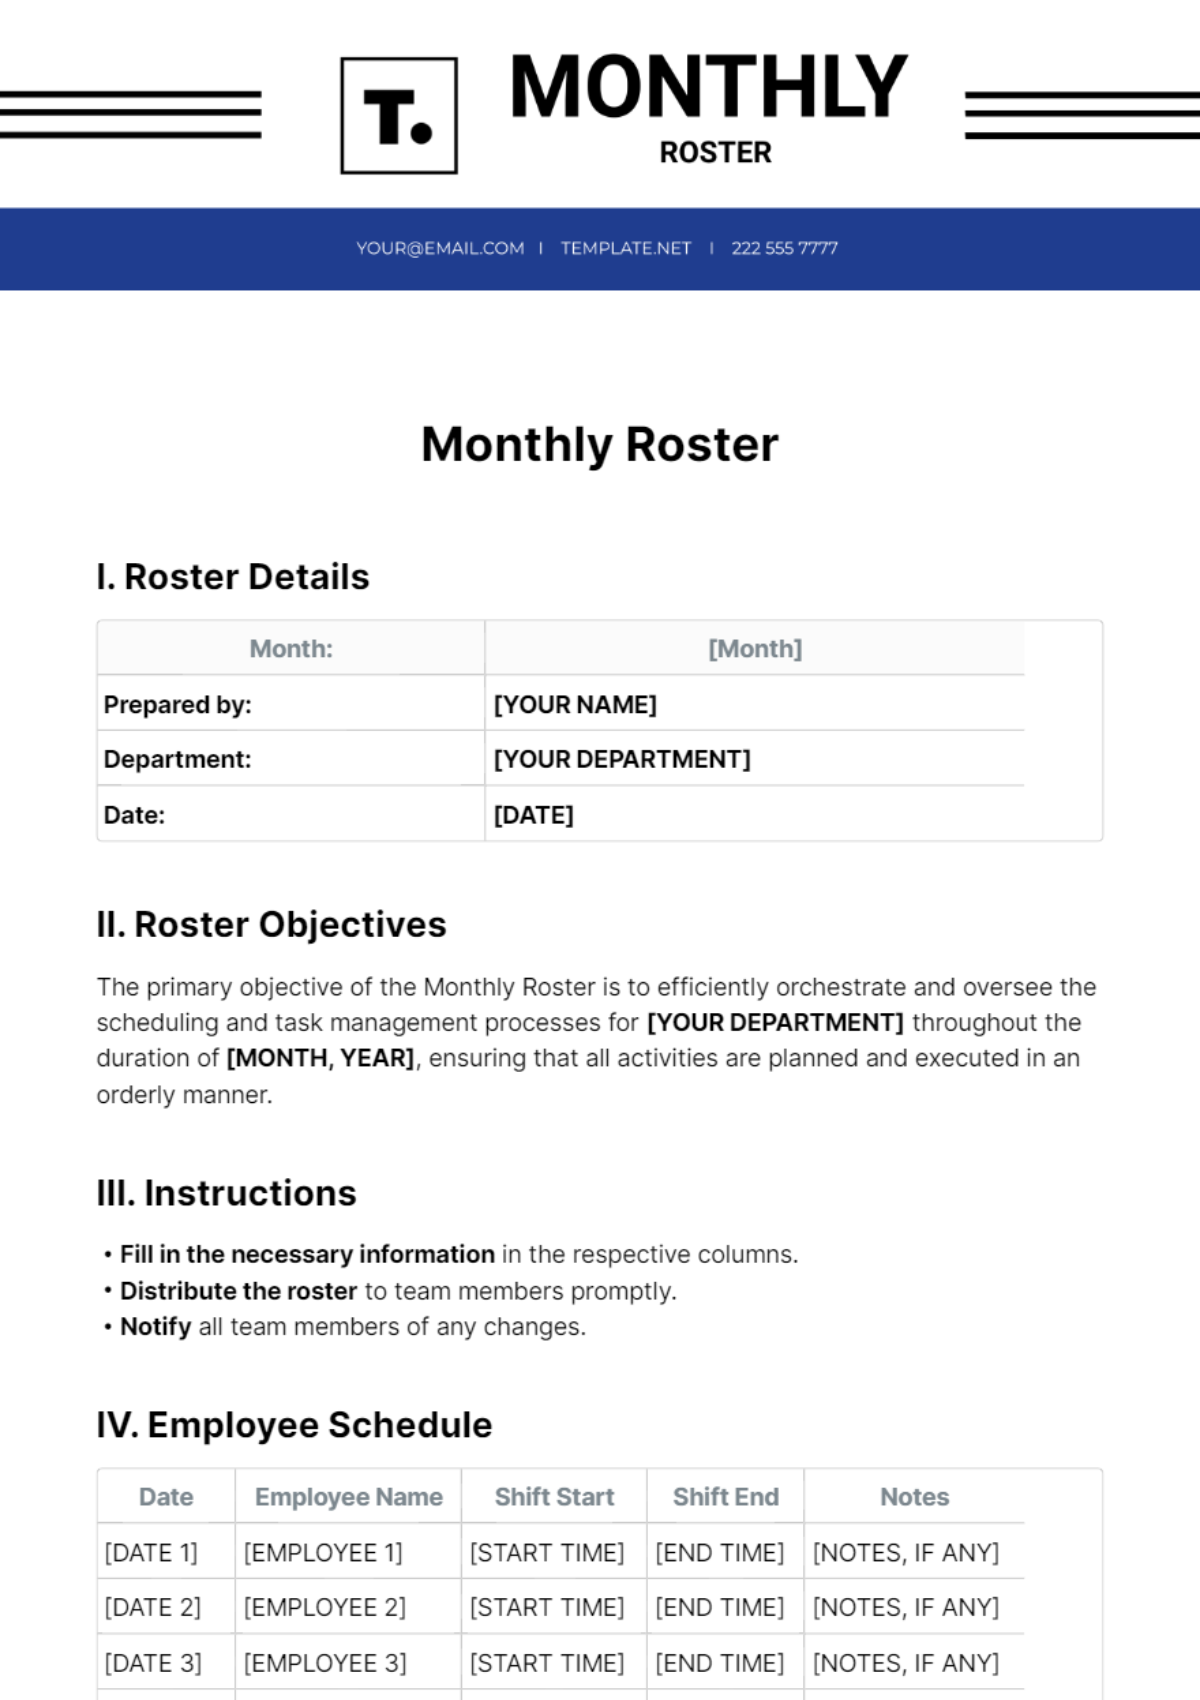 Monthly Roster Template